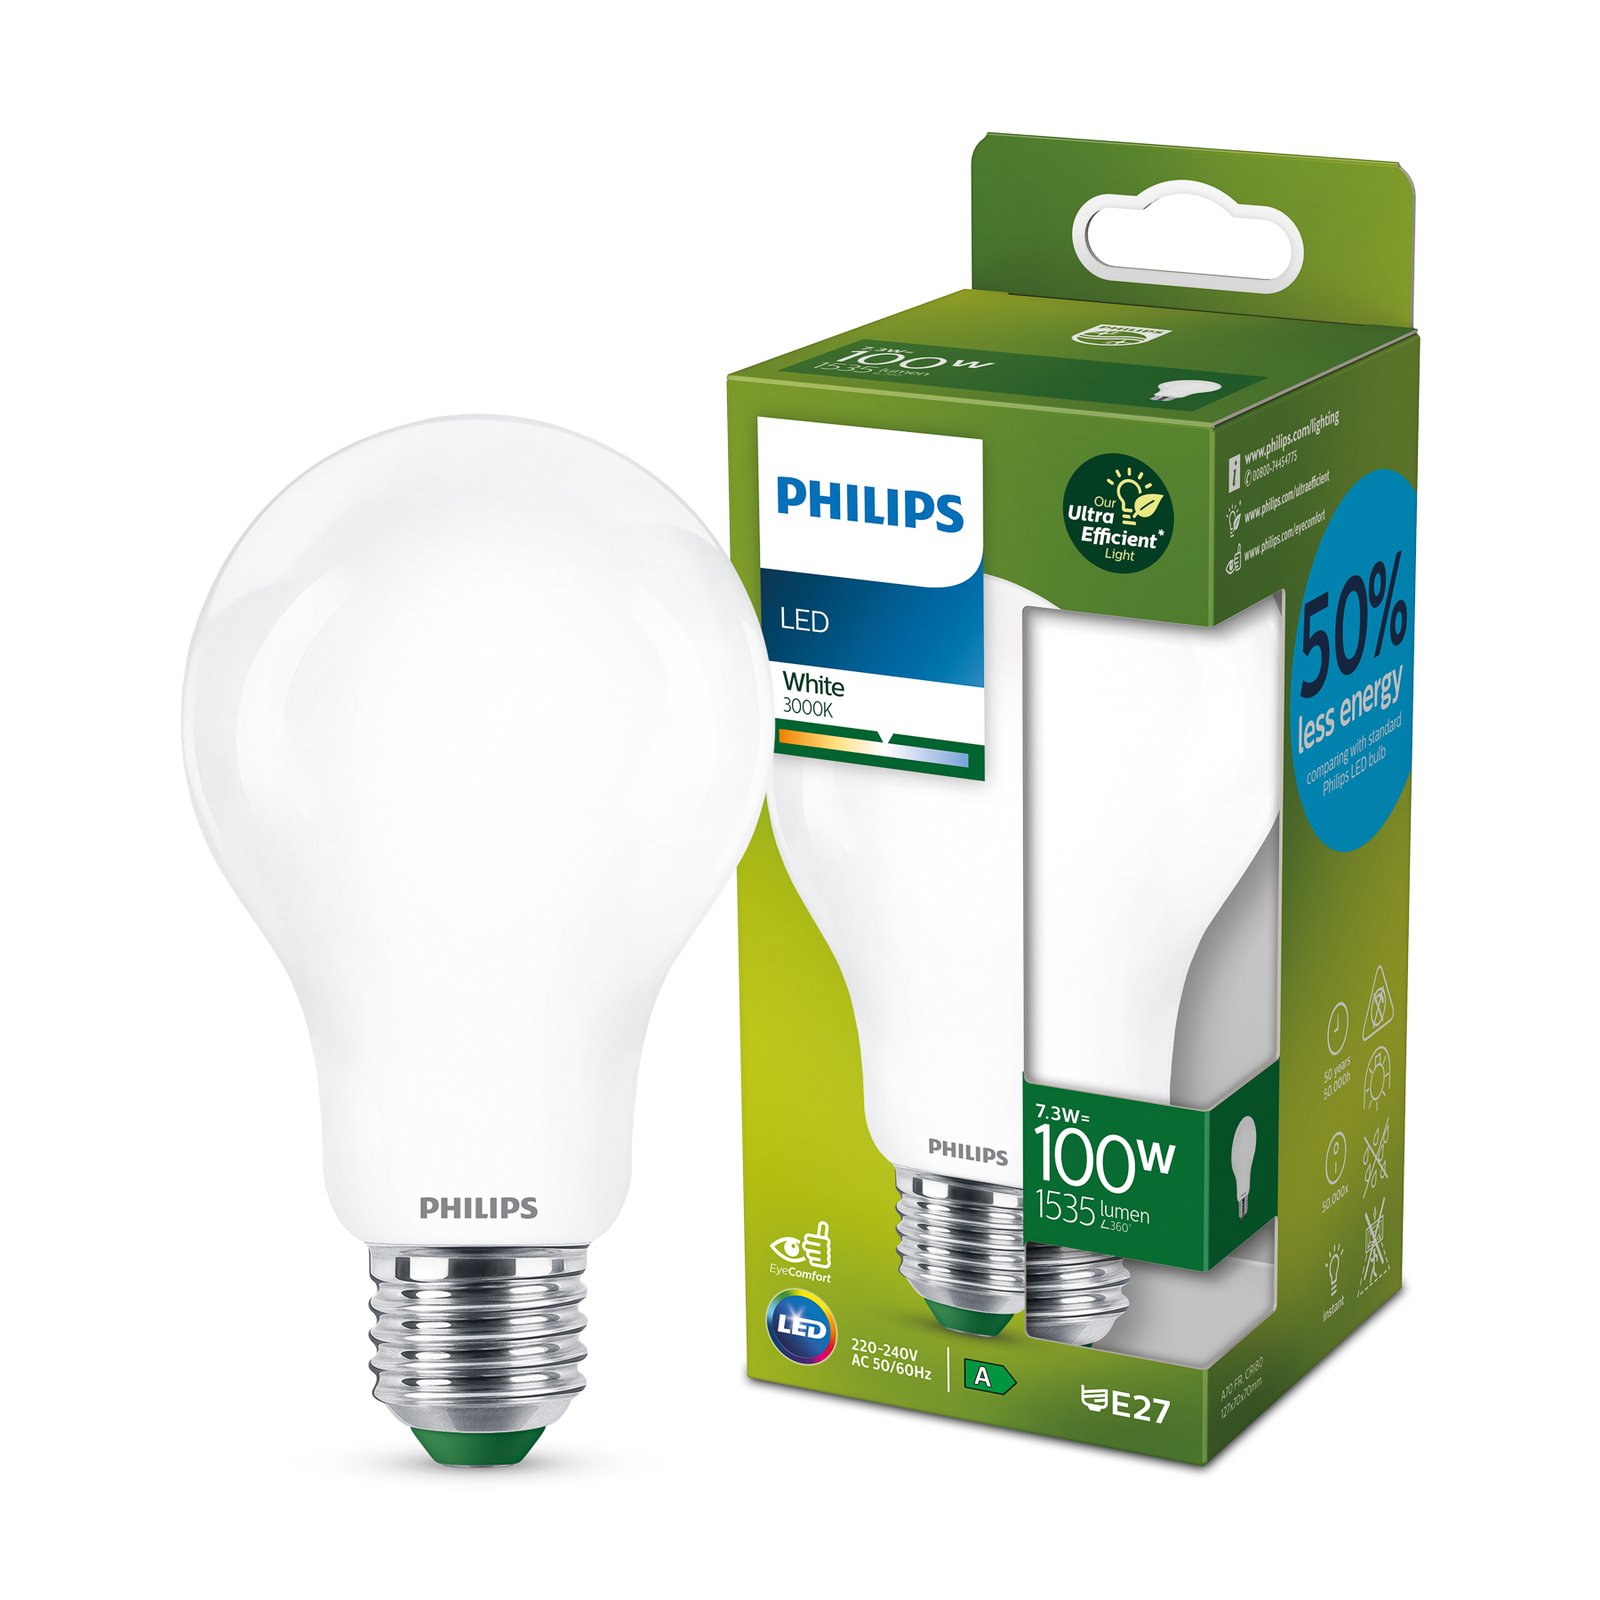 Europa optocht Zilver Philips LED lamp E27 A70 7,3W 1.535lm mat 3.000K | Lampen24.be